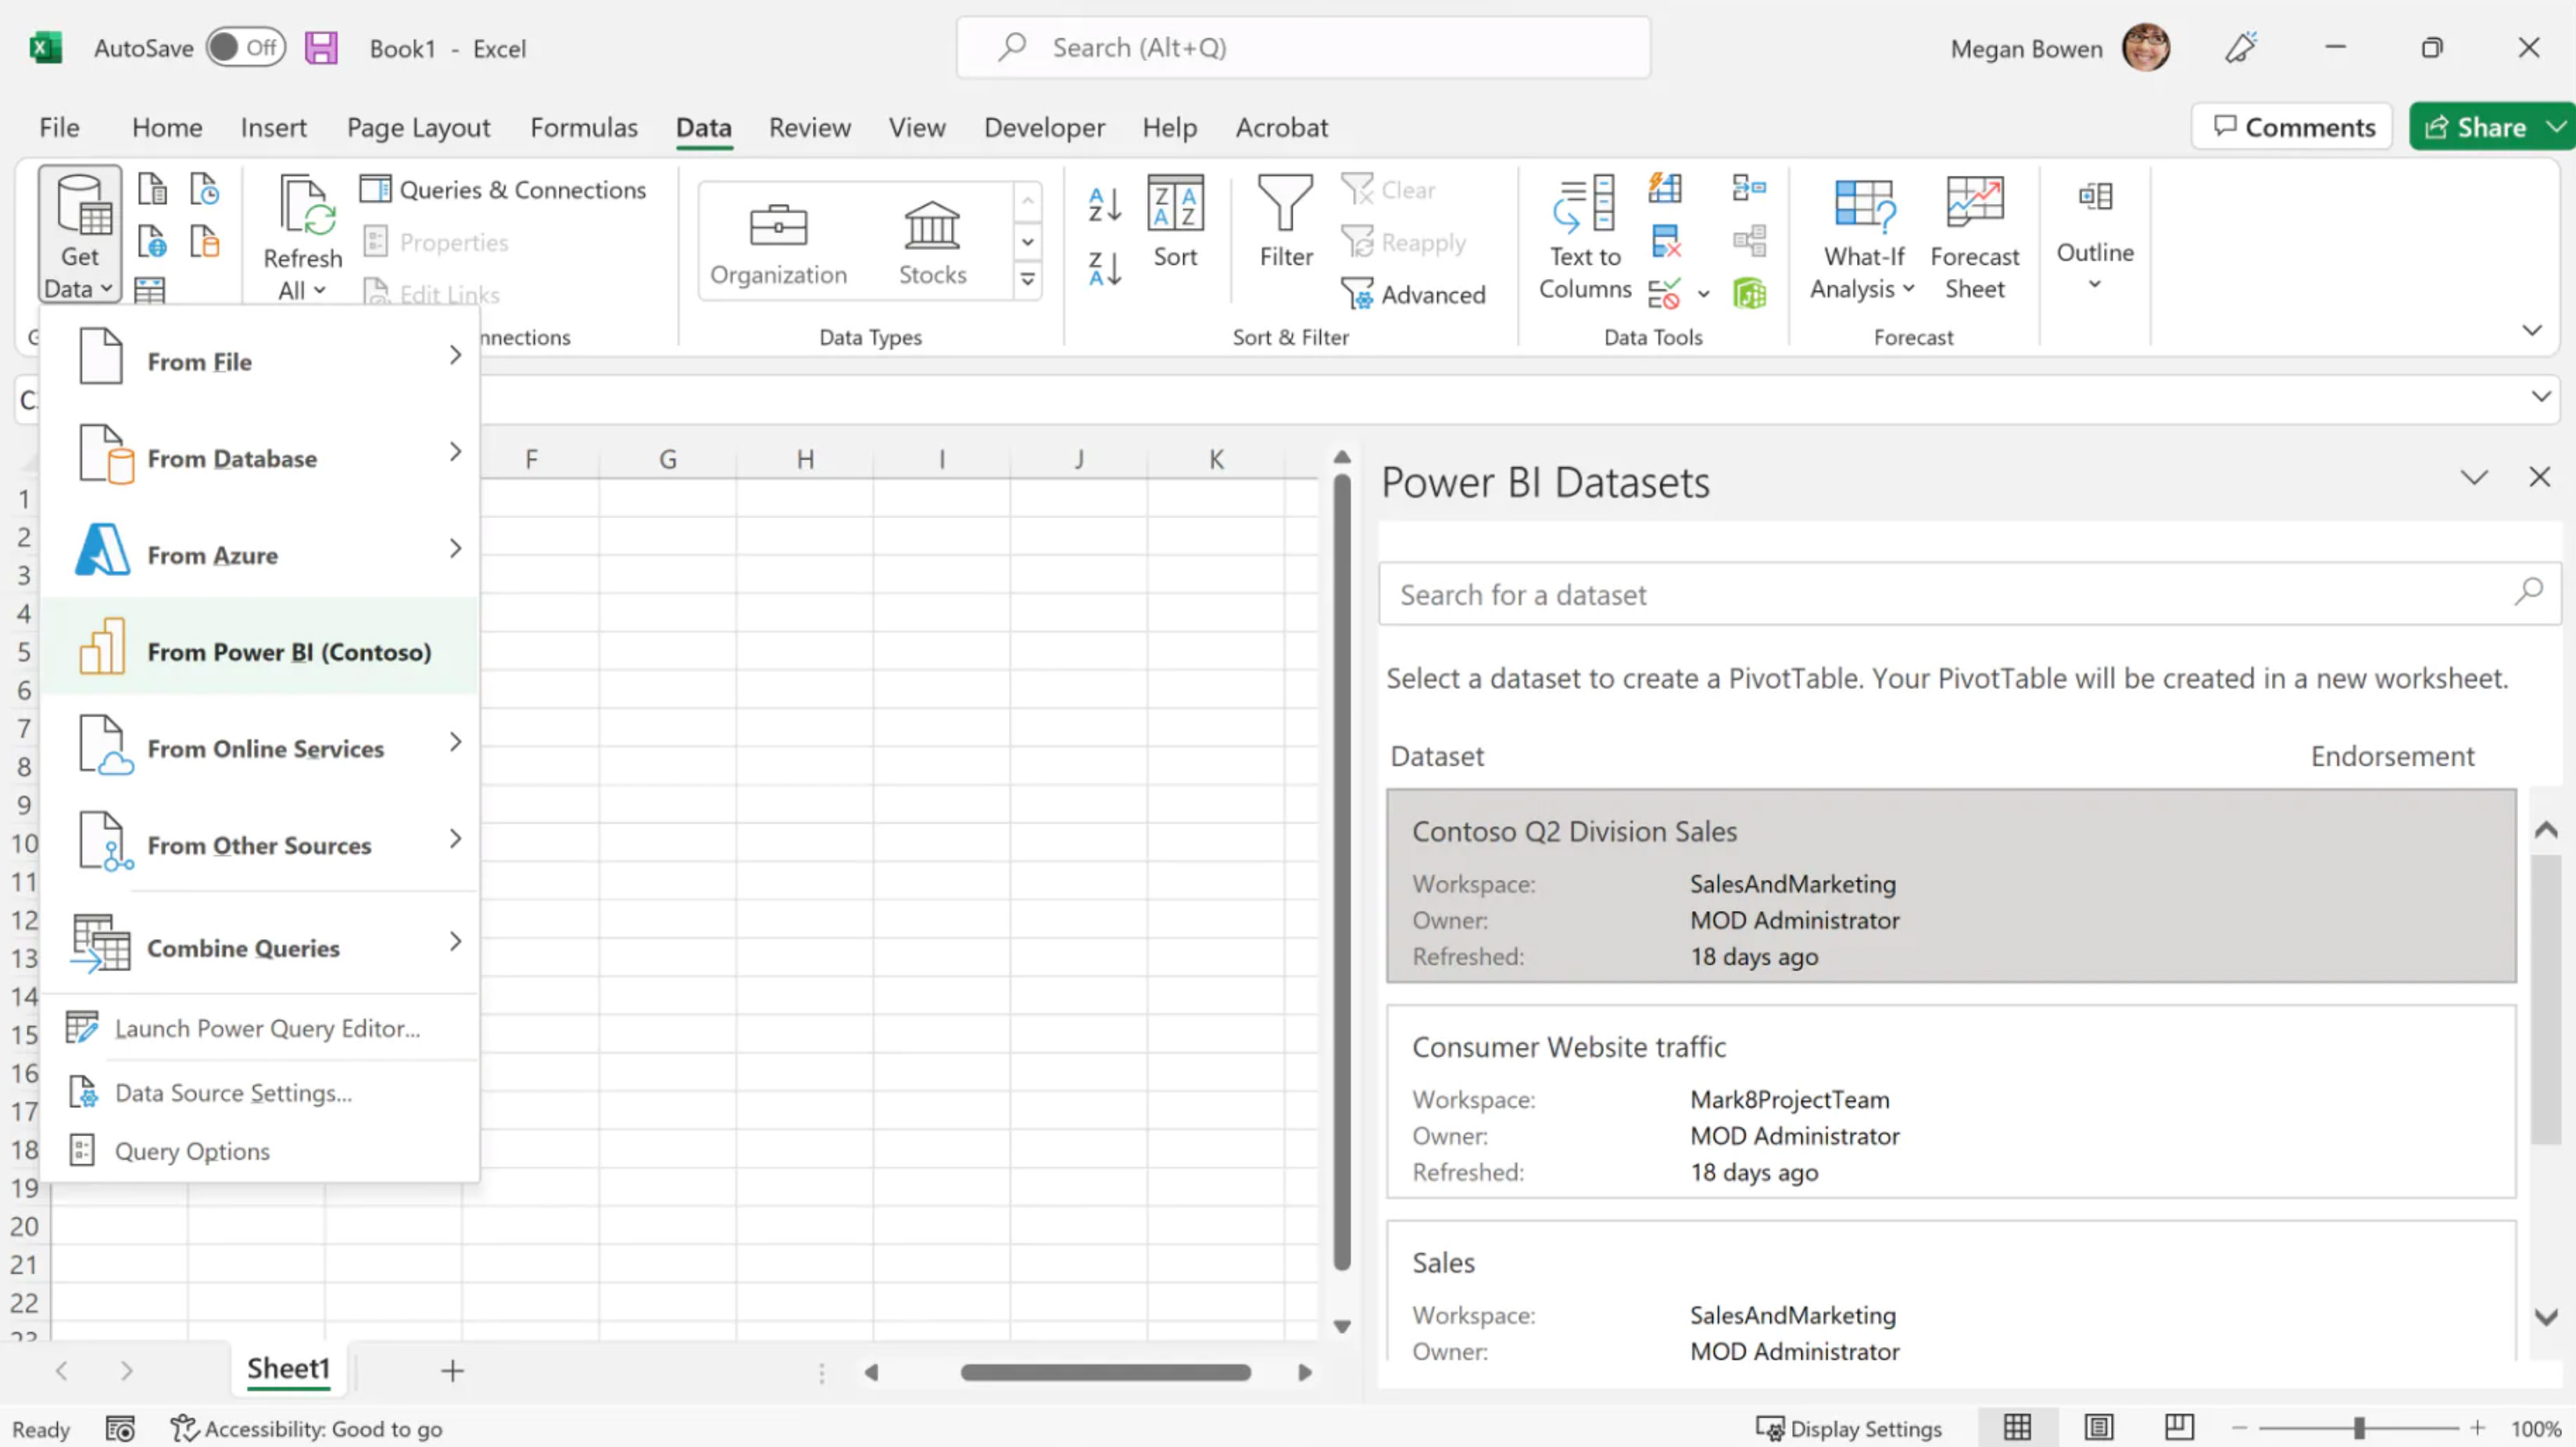 Image of Microsoft Excel Interface